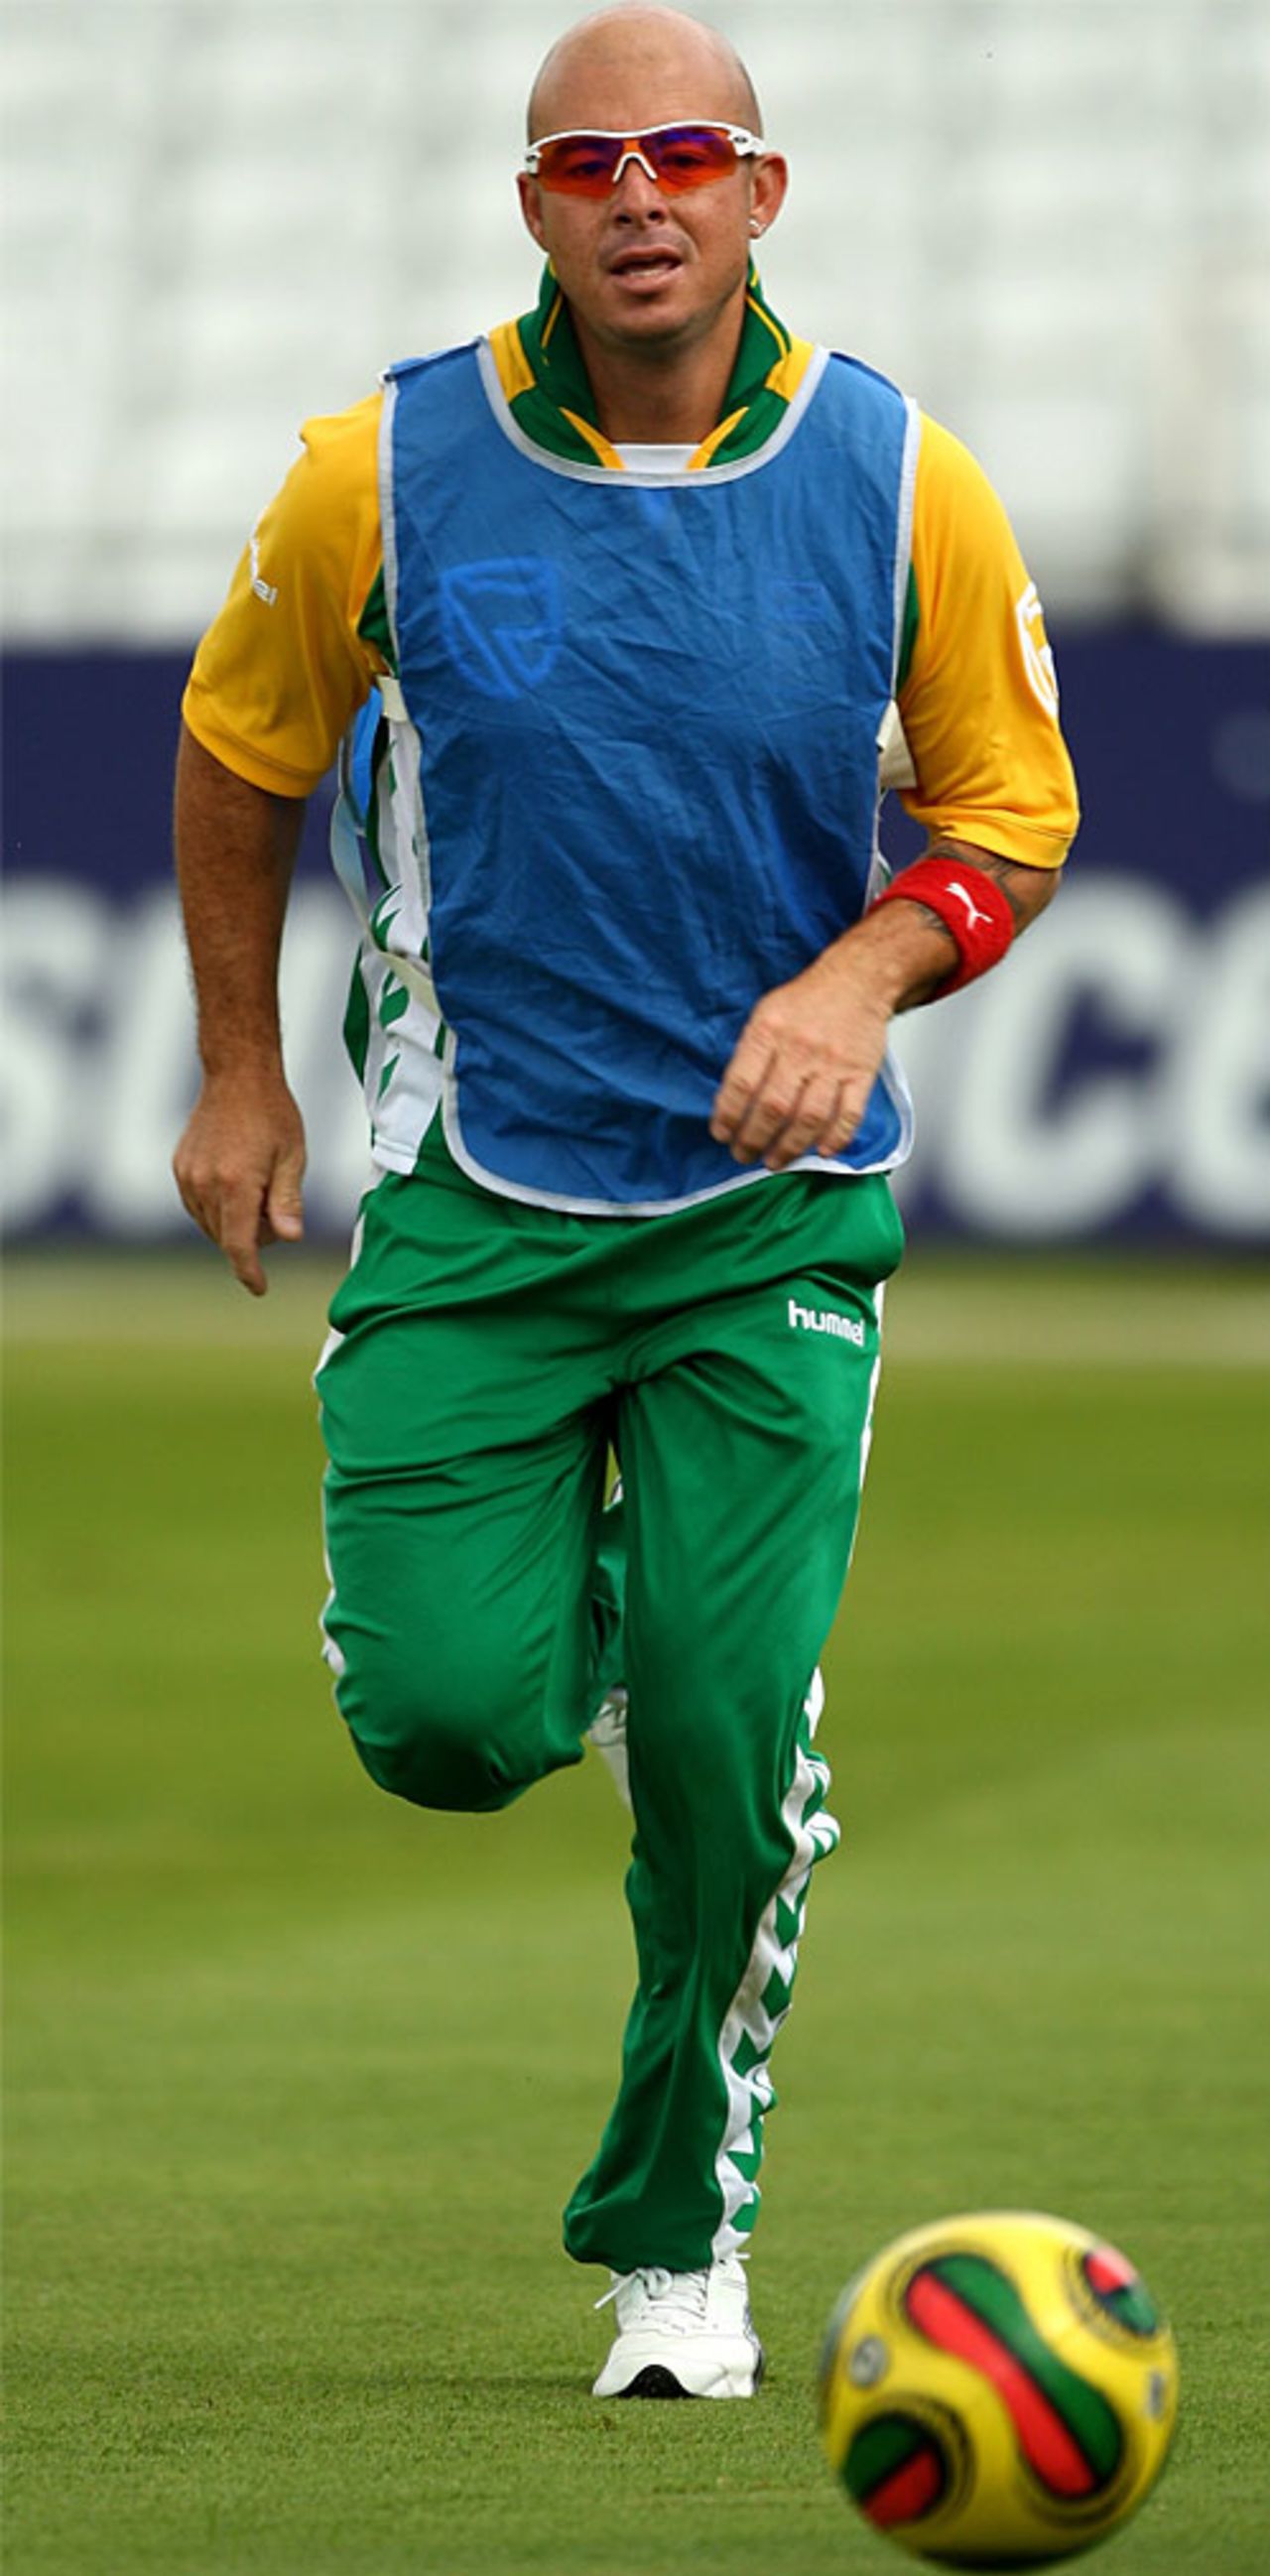 Herschelle Gibbs warms up ahead of South Africa's match against England, Trent Bridge, August 25, 2008